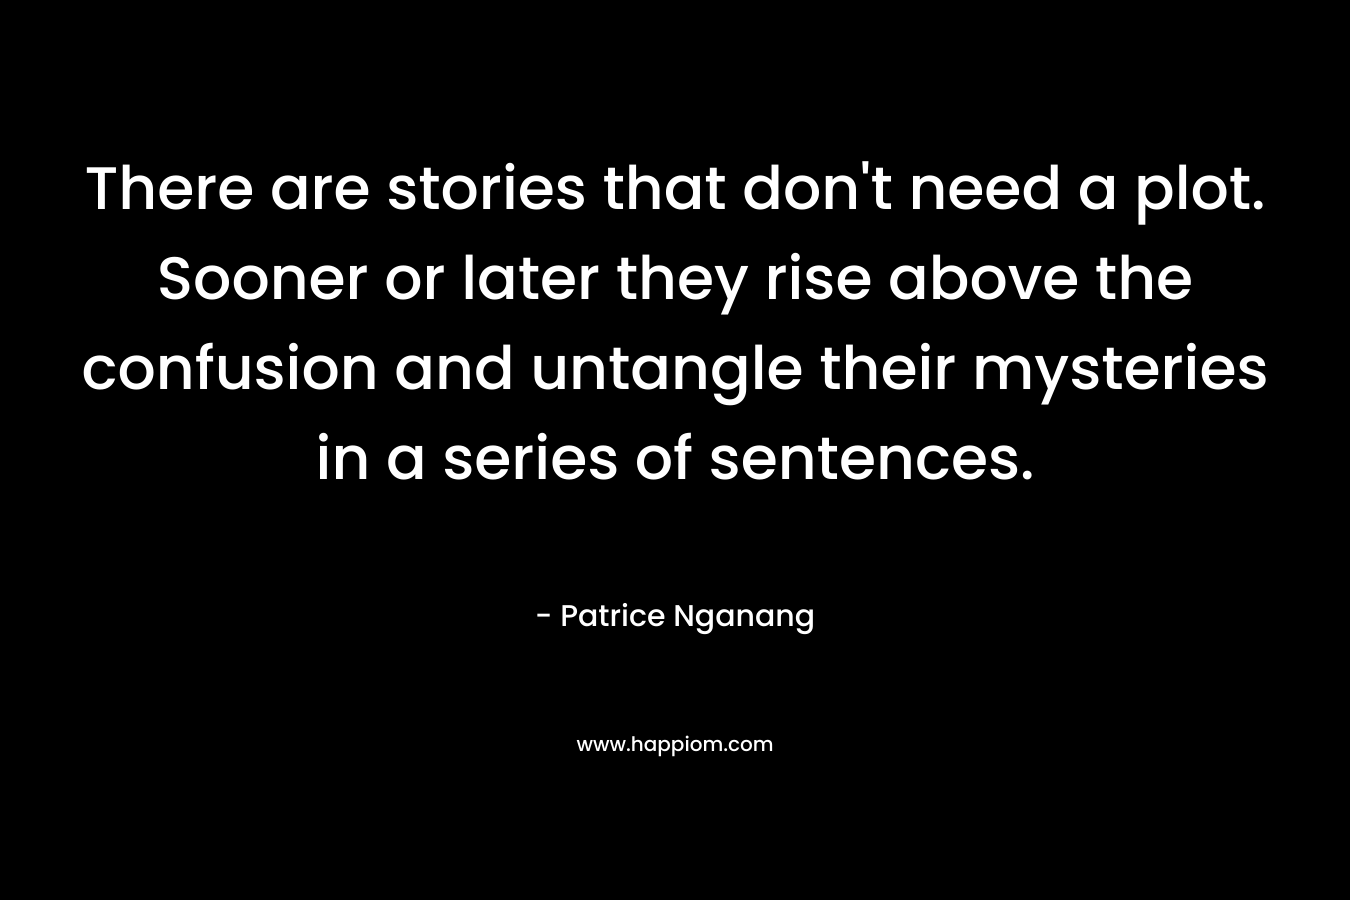 There are stories that don’t need a plot. Sooner or later they rise above the confusion and untangle their mysteries in a series of sentences. – Patrice Nganang